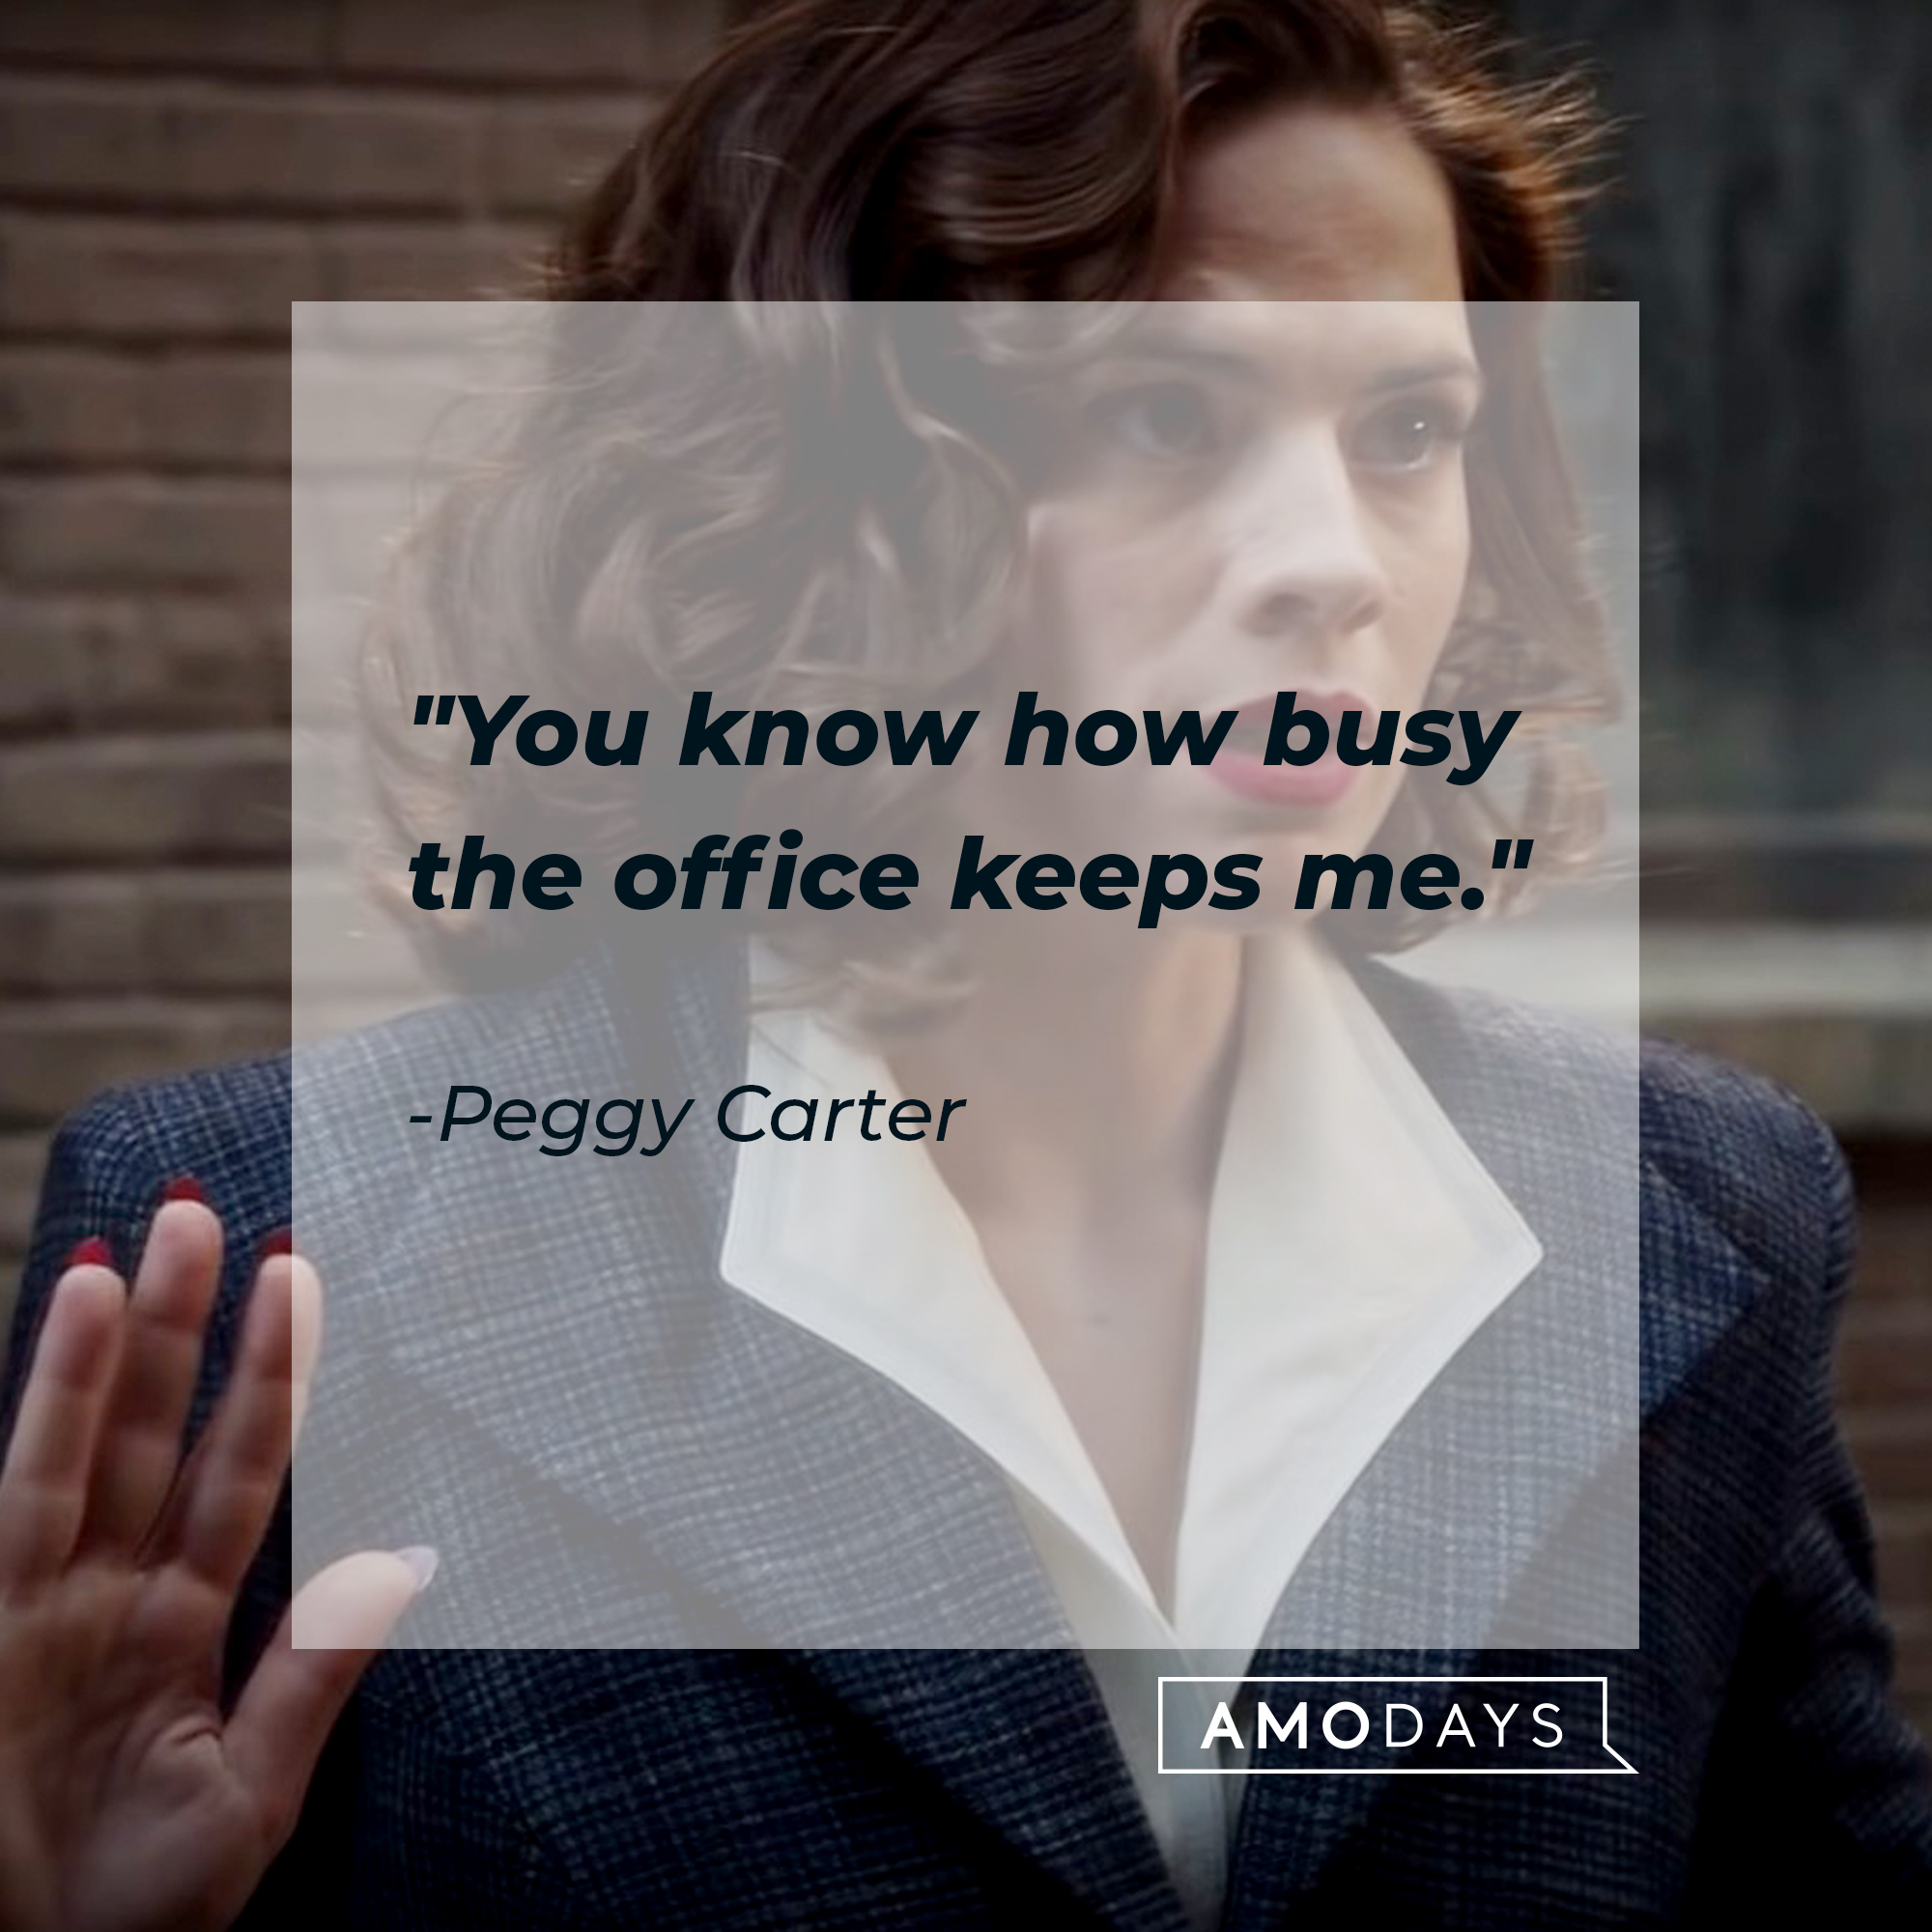 Peggy Carter as Agent's quote: "You know how busy the office keeps me." | Source: Facebook.com/marvelstudios